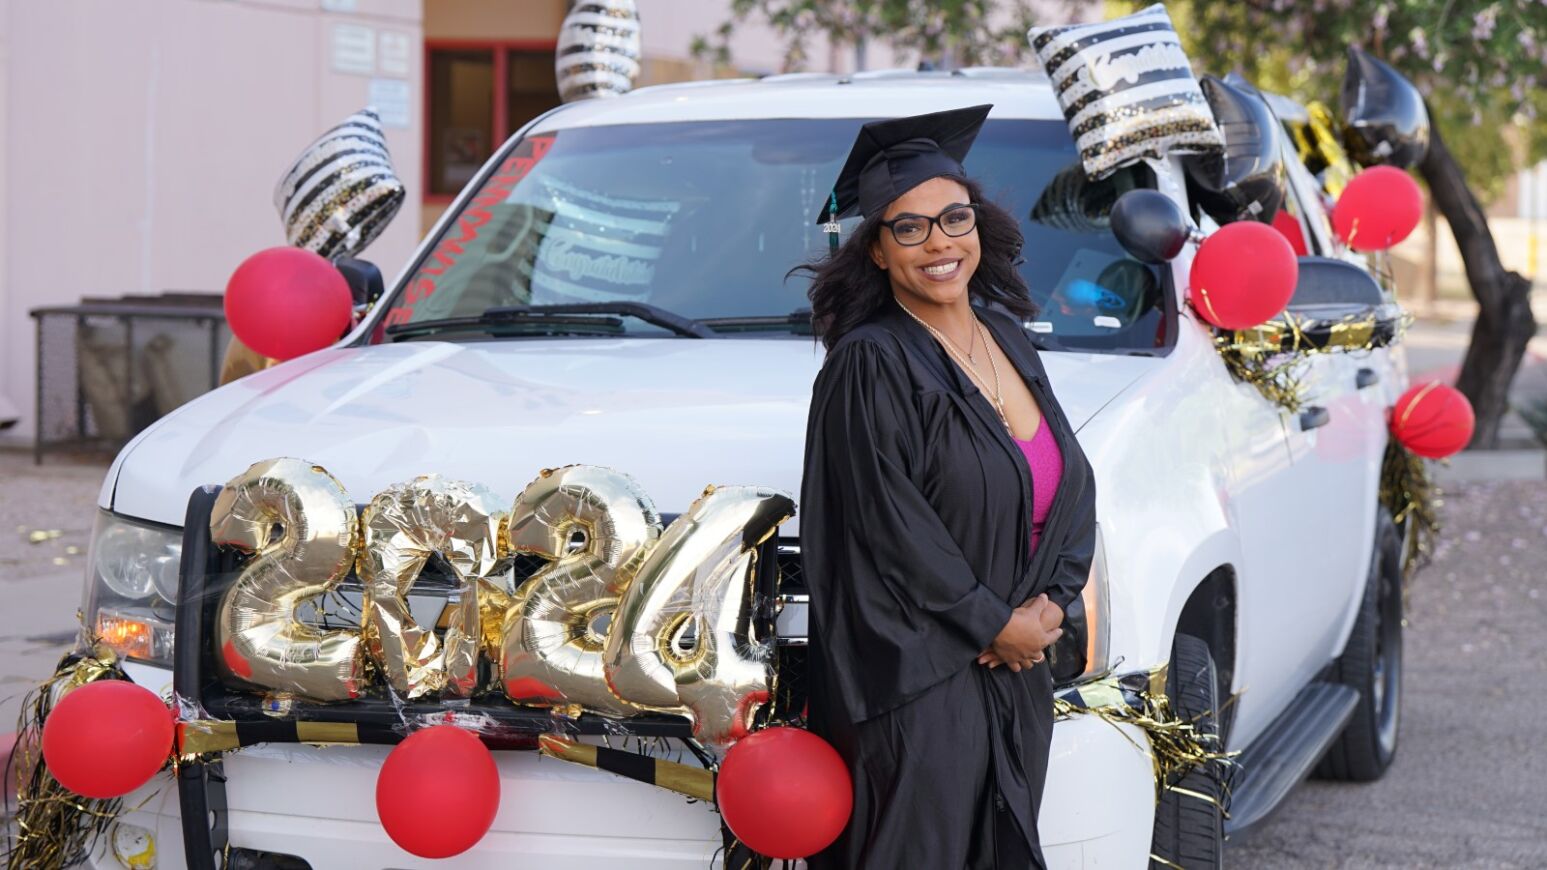 A Project MORE grad smiles in front of a white SUV decked out in graduation balloons